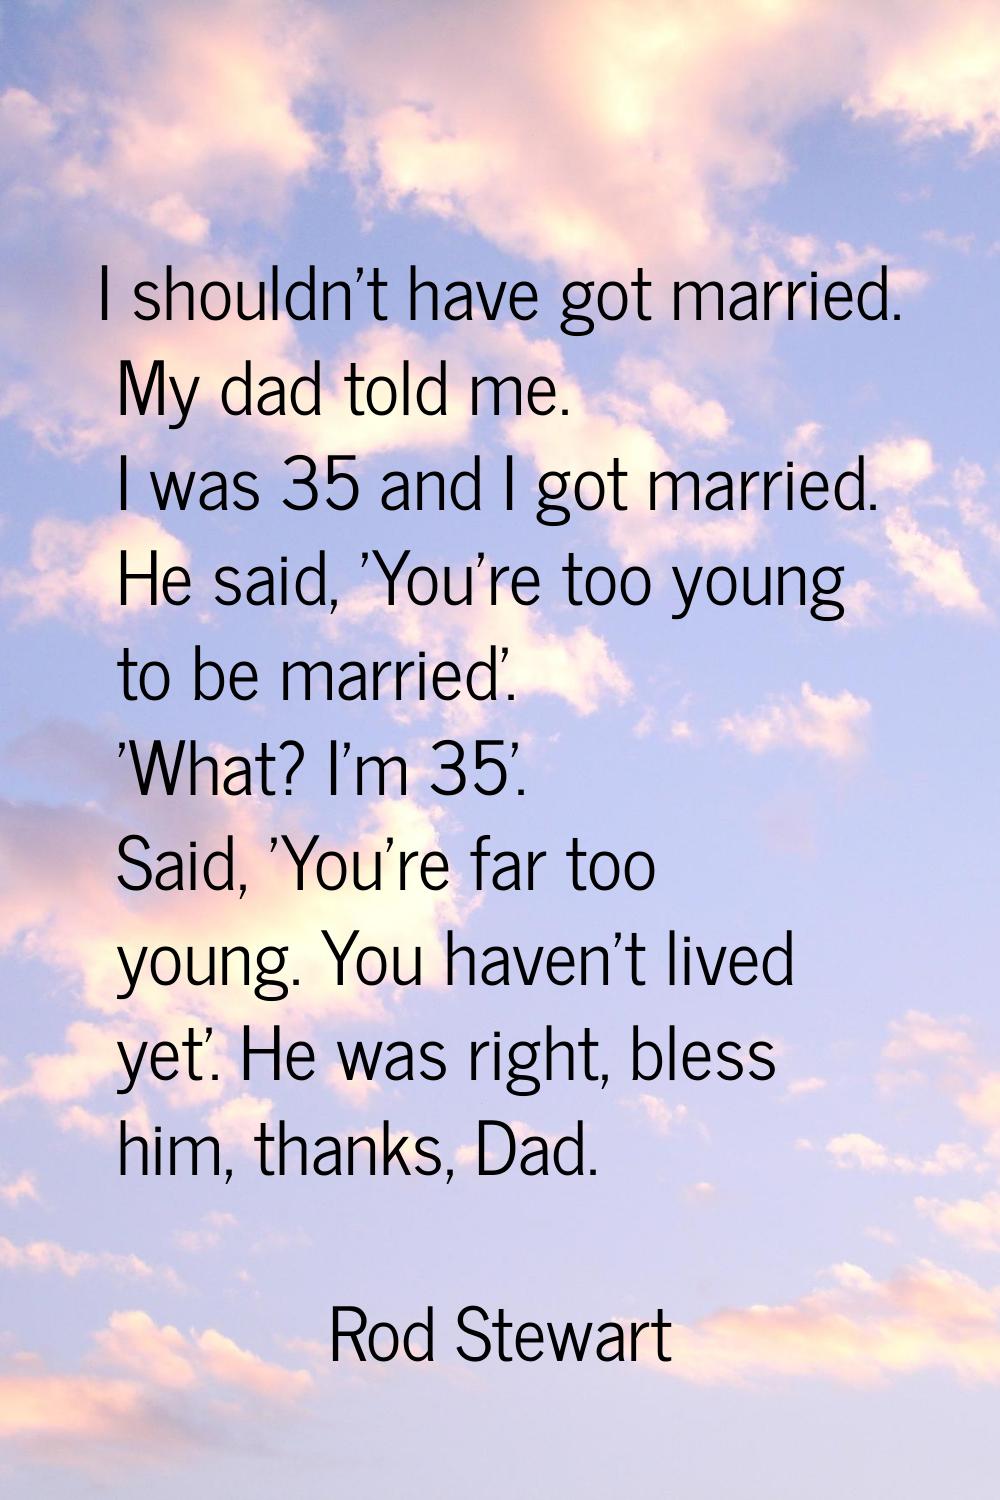 I shouldn't have got married. My dad told me. I was 35 and I got married. He said, 'You're too youn